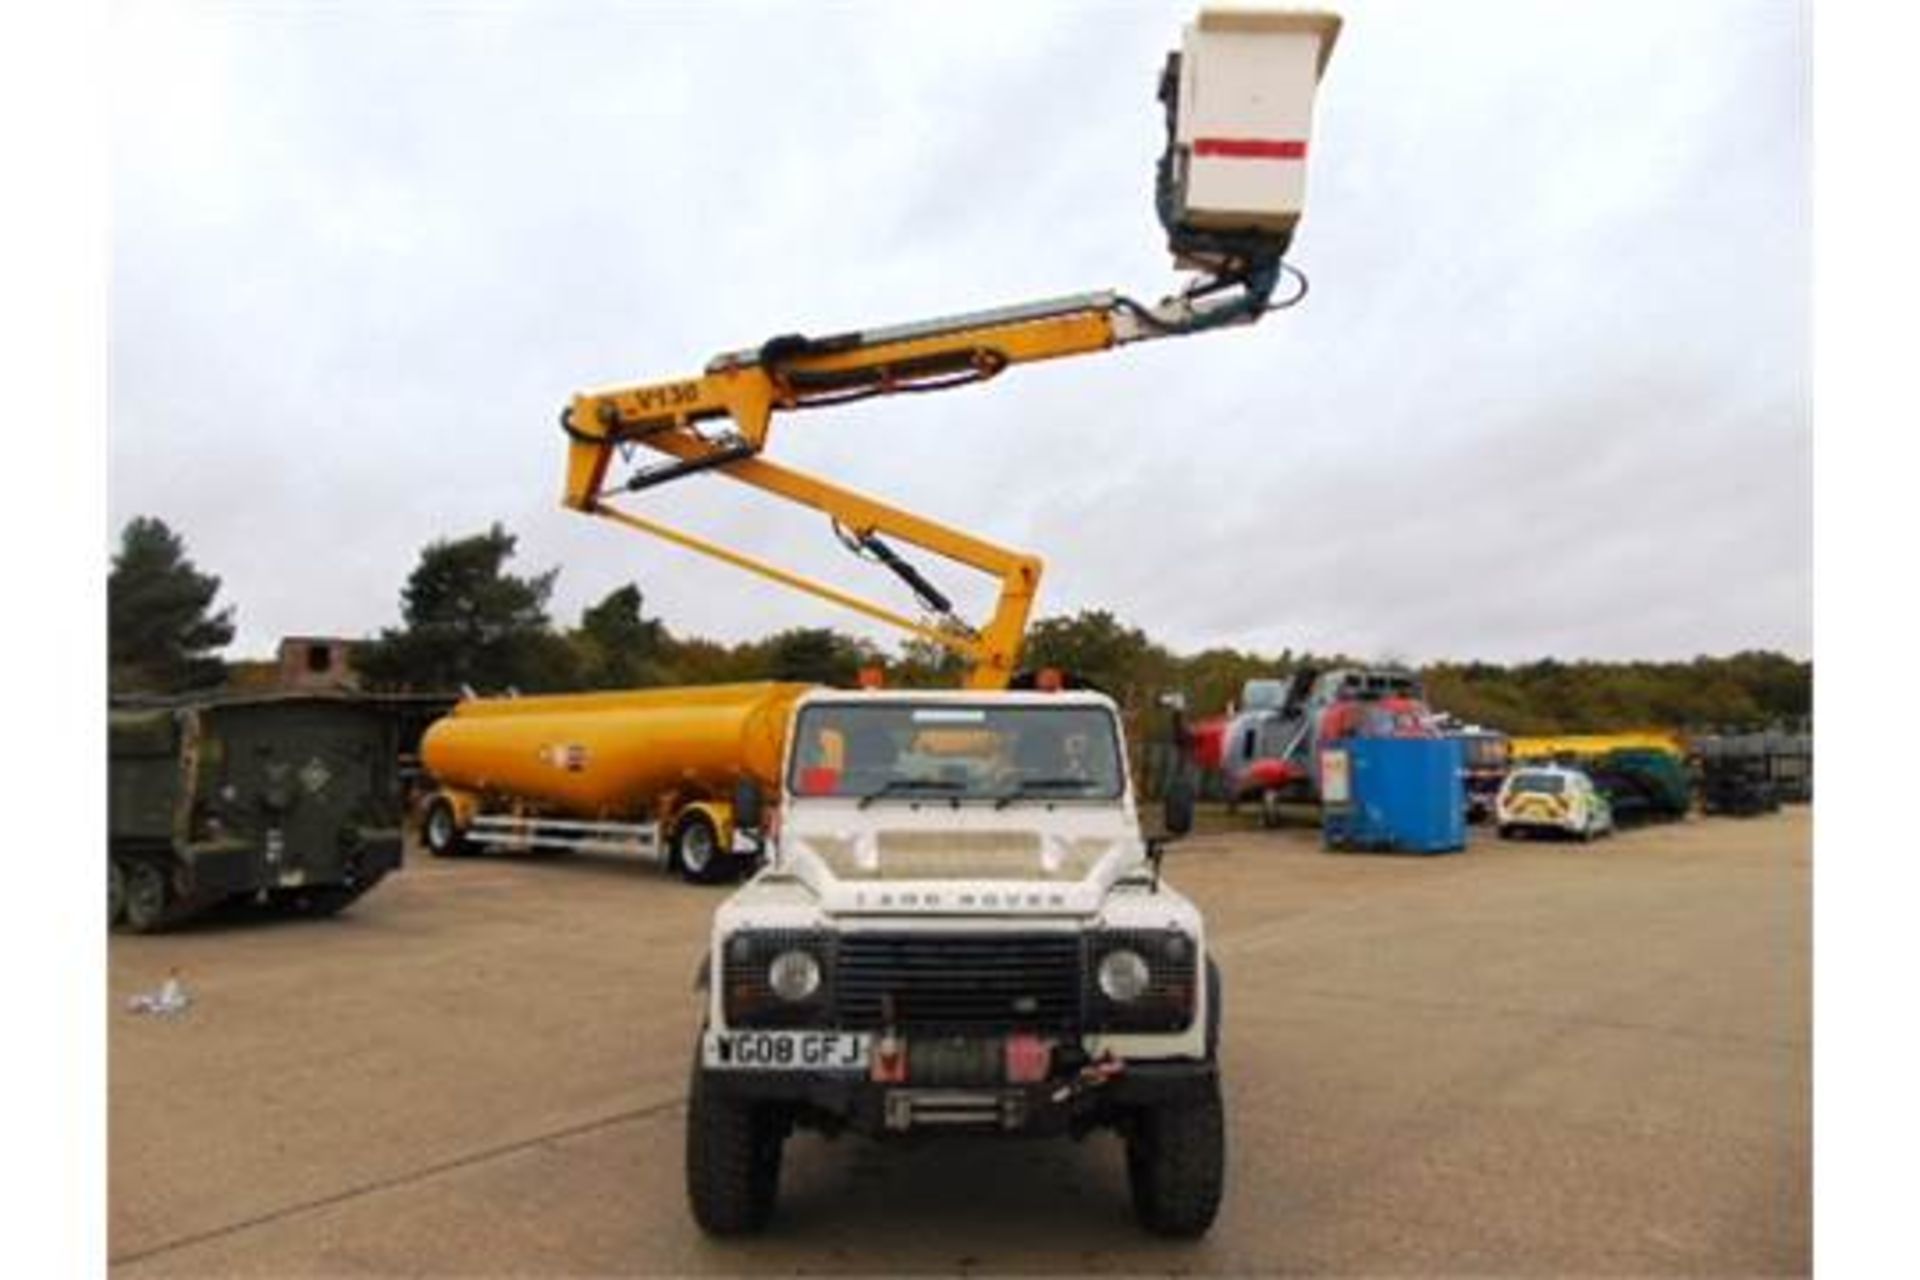 Land Rover Defender 110 High Capacity Cherry Picker - Image 2 of 34